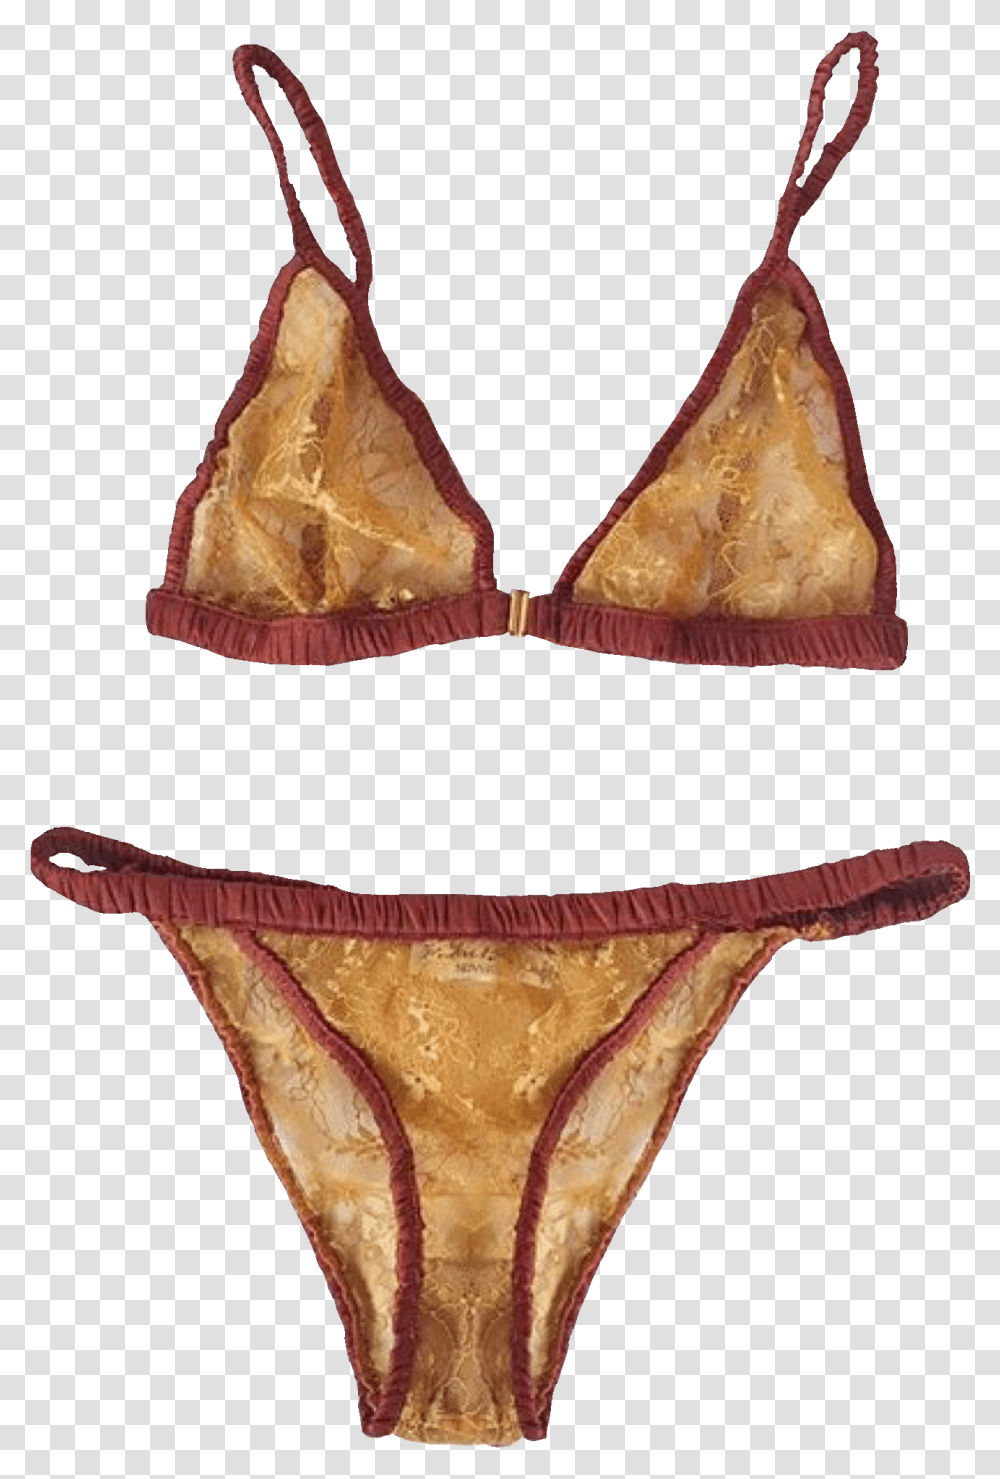 Gold And Rust Two Lingerie Top, Clothing, Apparel, Underwear, Bra Transparent Png